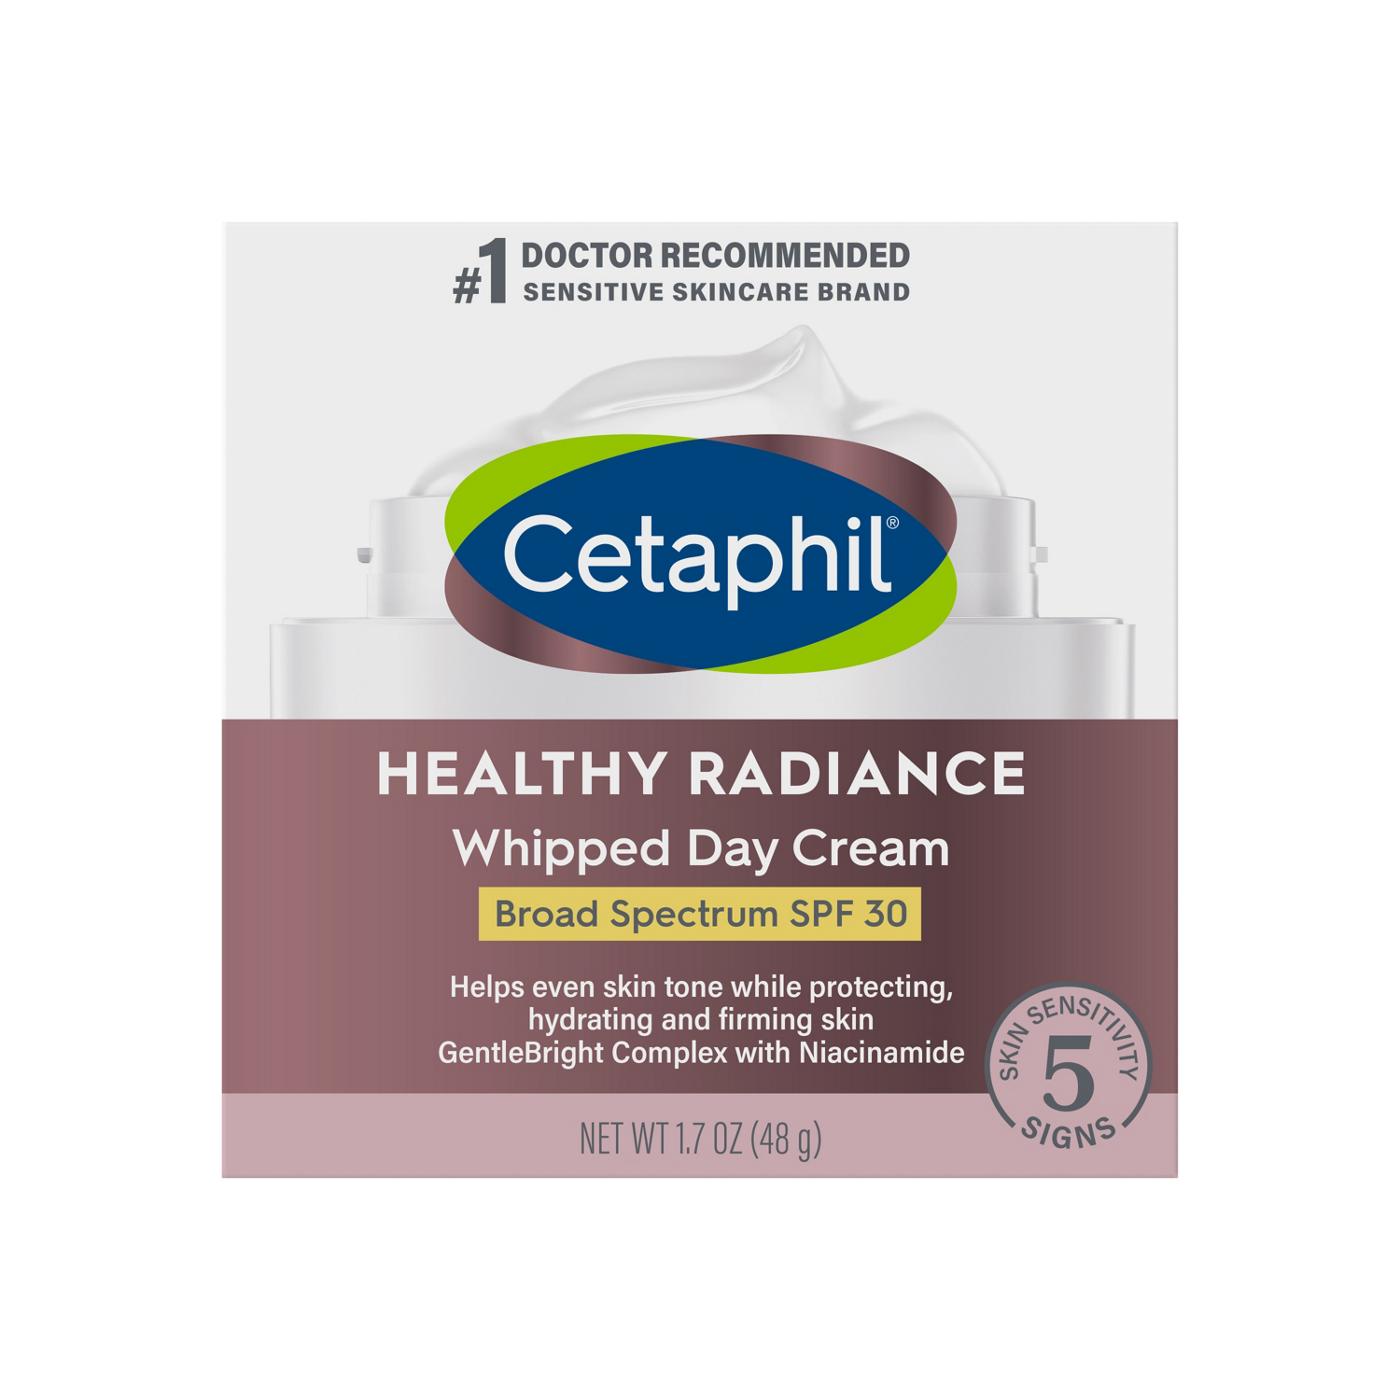 Cetaphil Healthy Radiance Whipped Day Cream with SPF 30; image 1 of 8